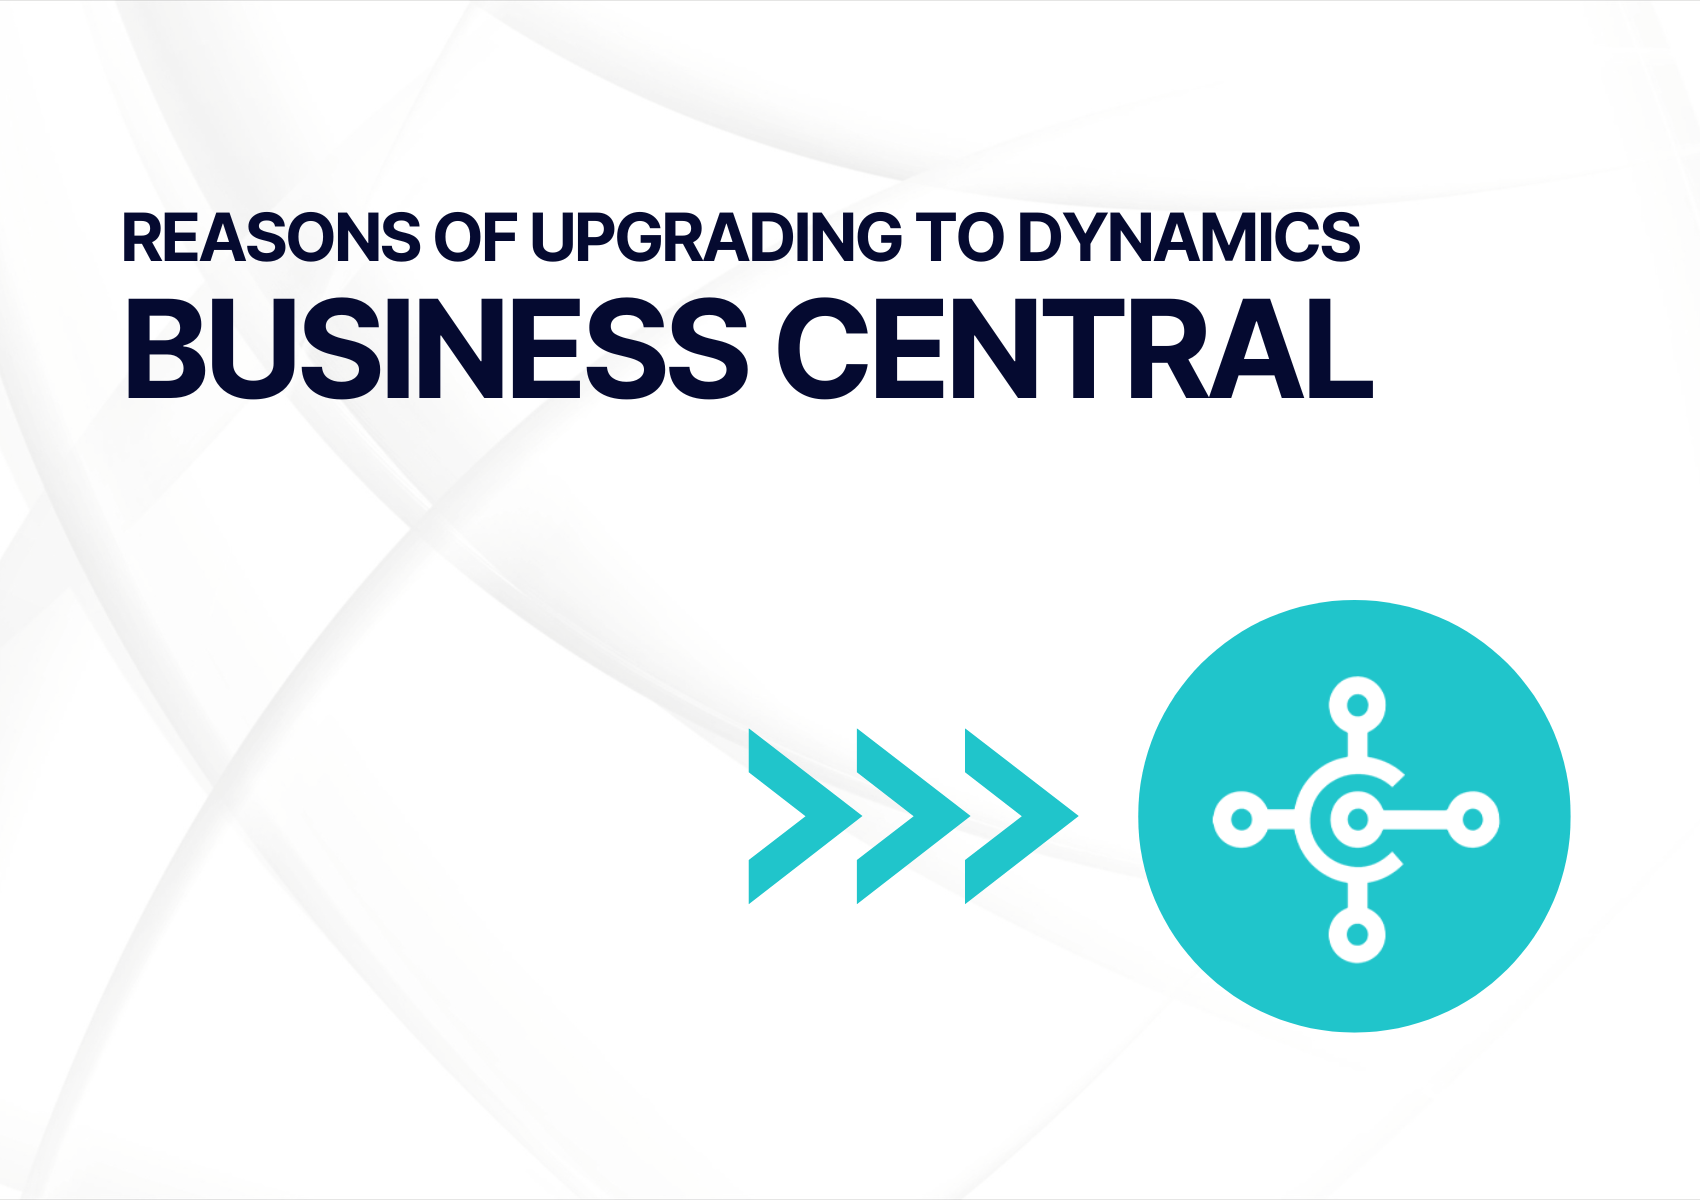 Benefits of Upgrading to Dynamics Business Central